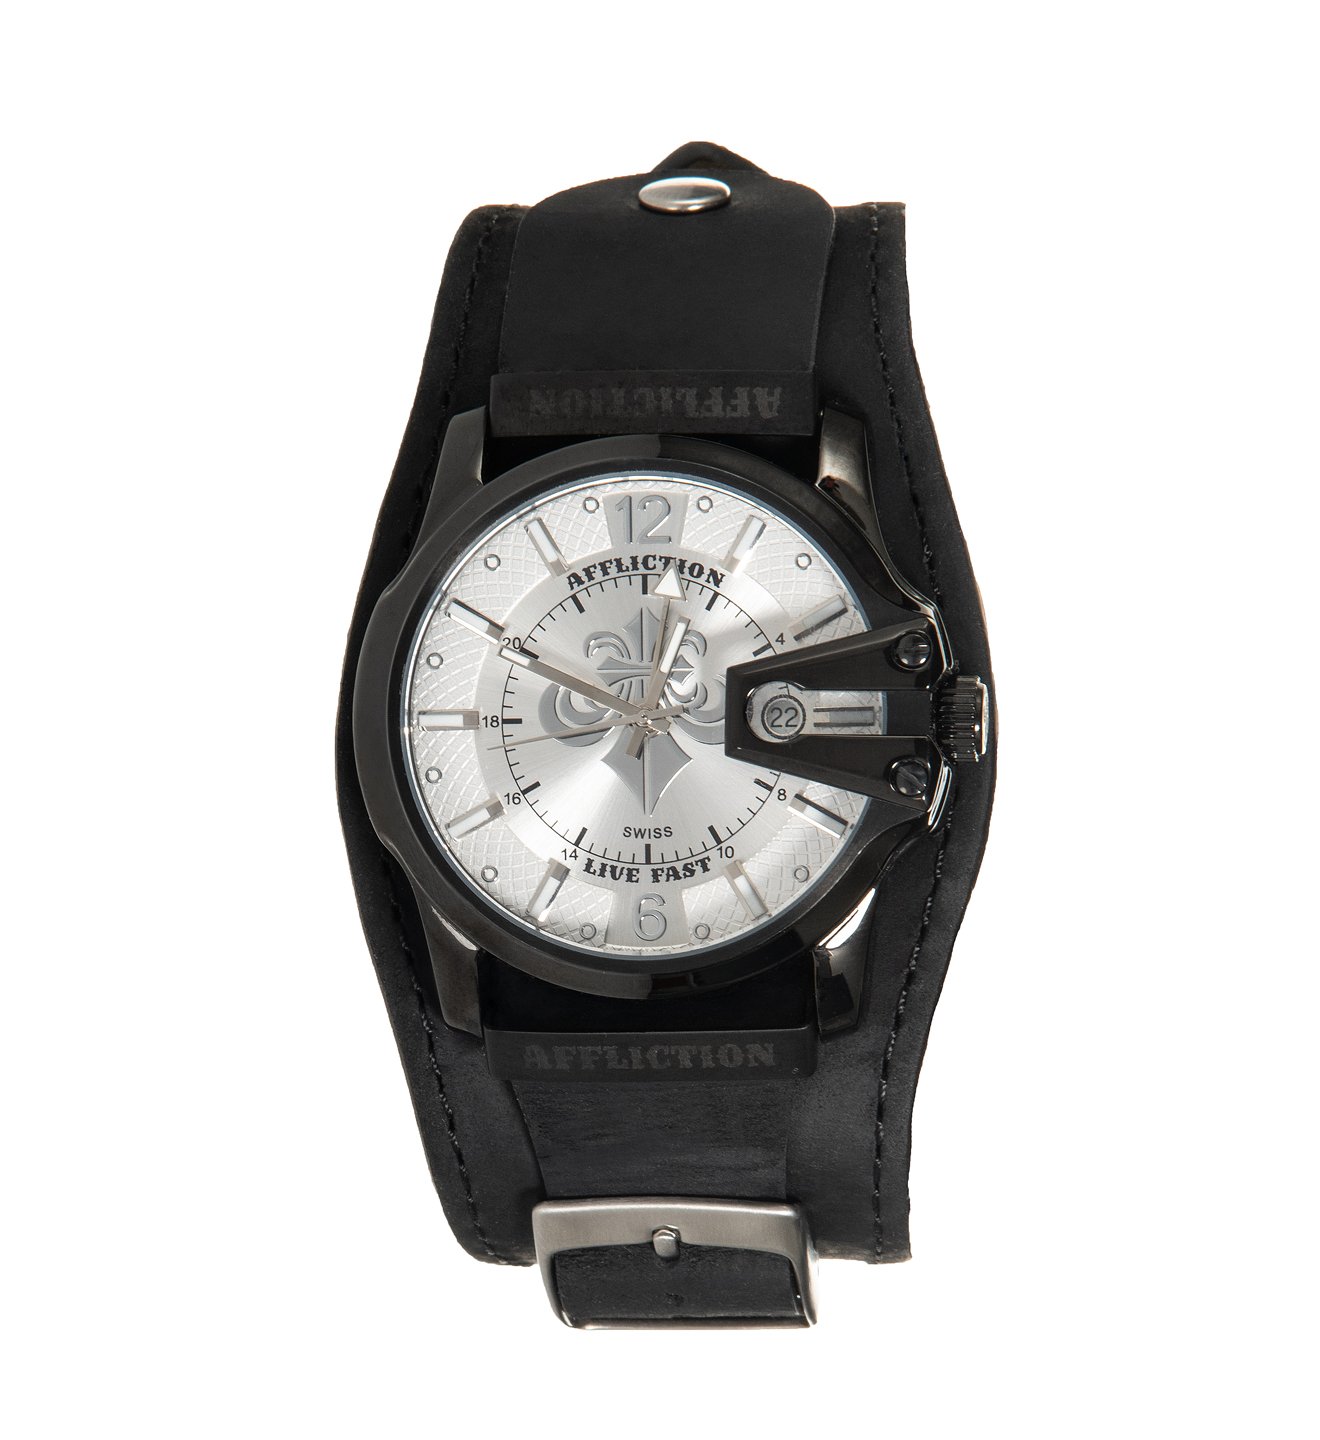 Duel X Watch - Mens Watches - Affliction Clothing